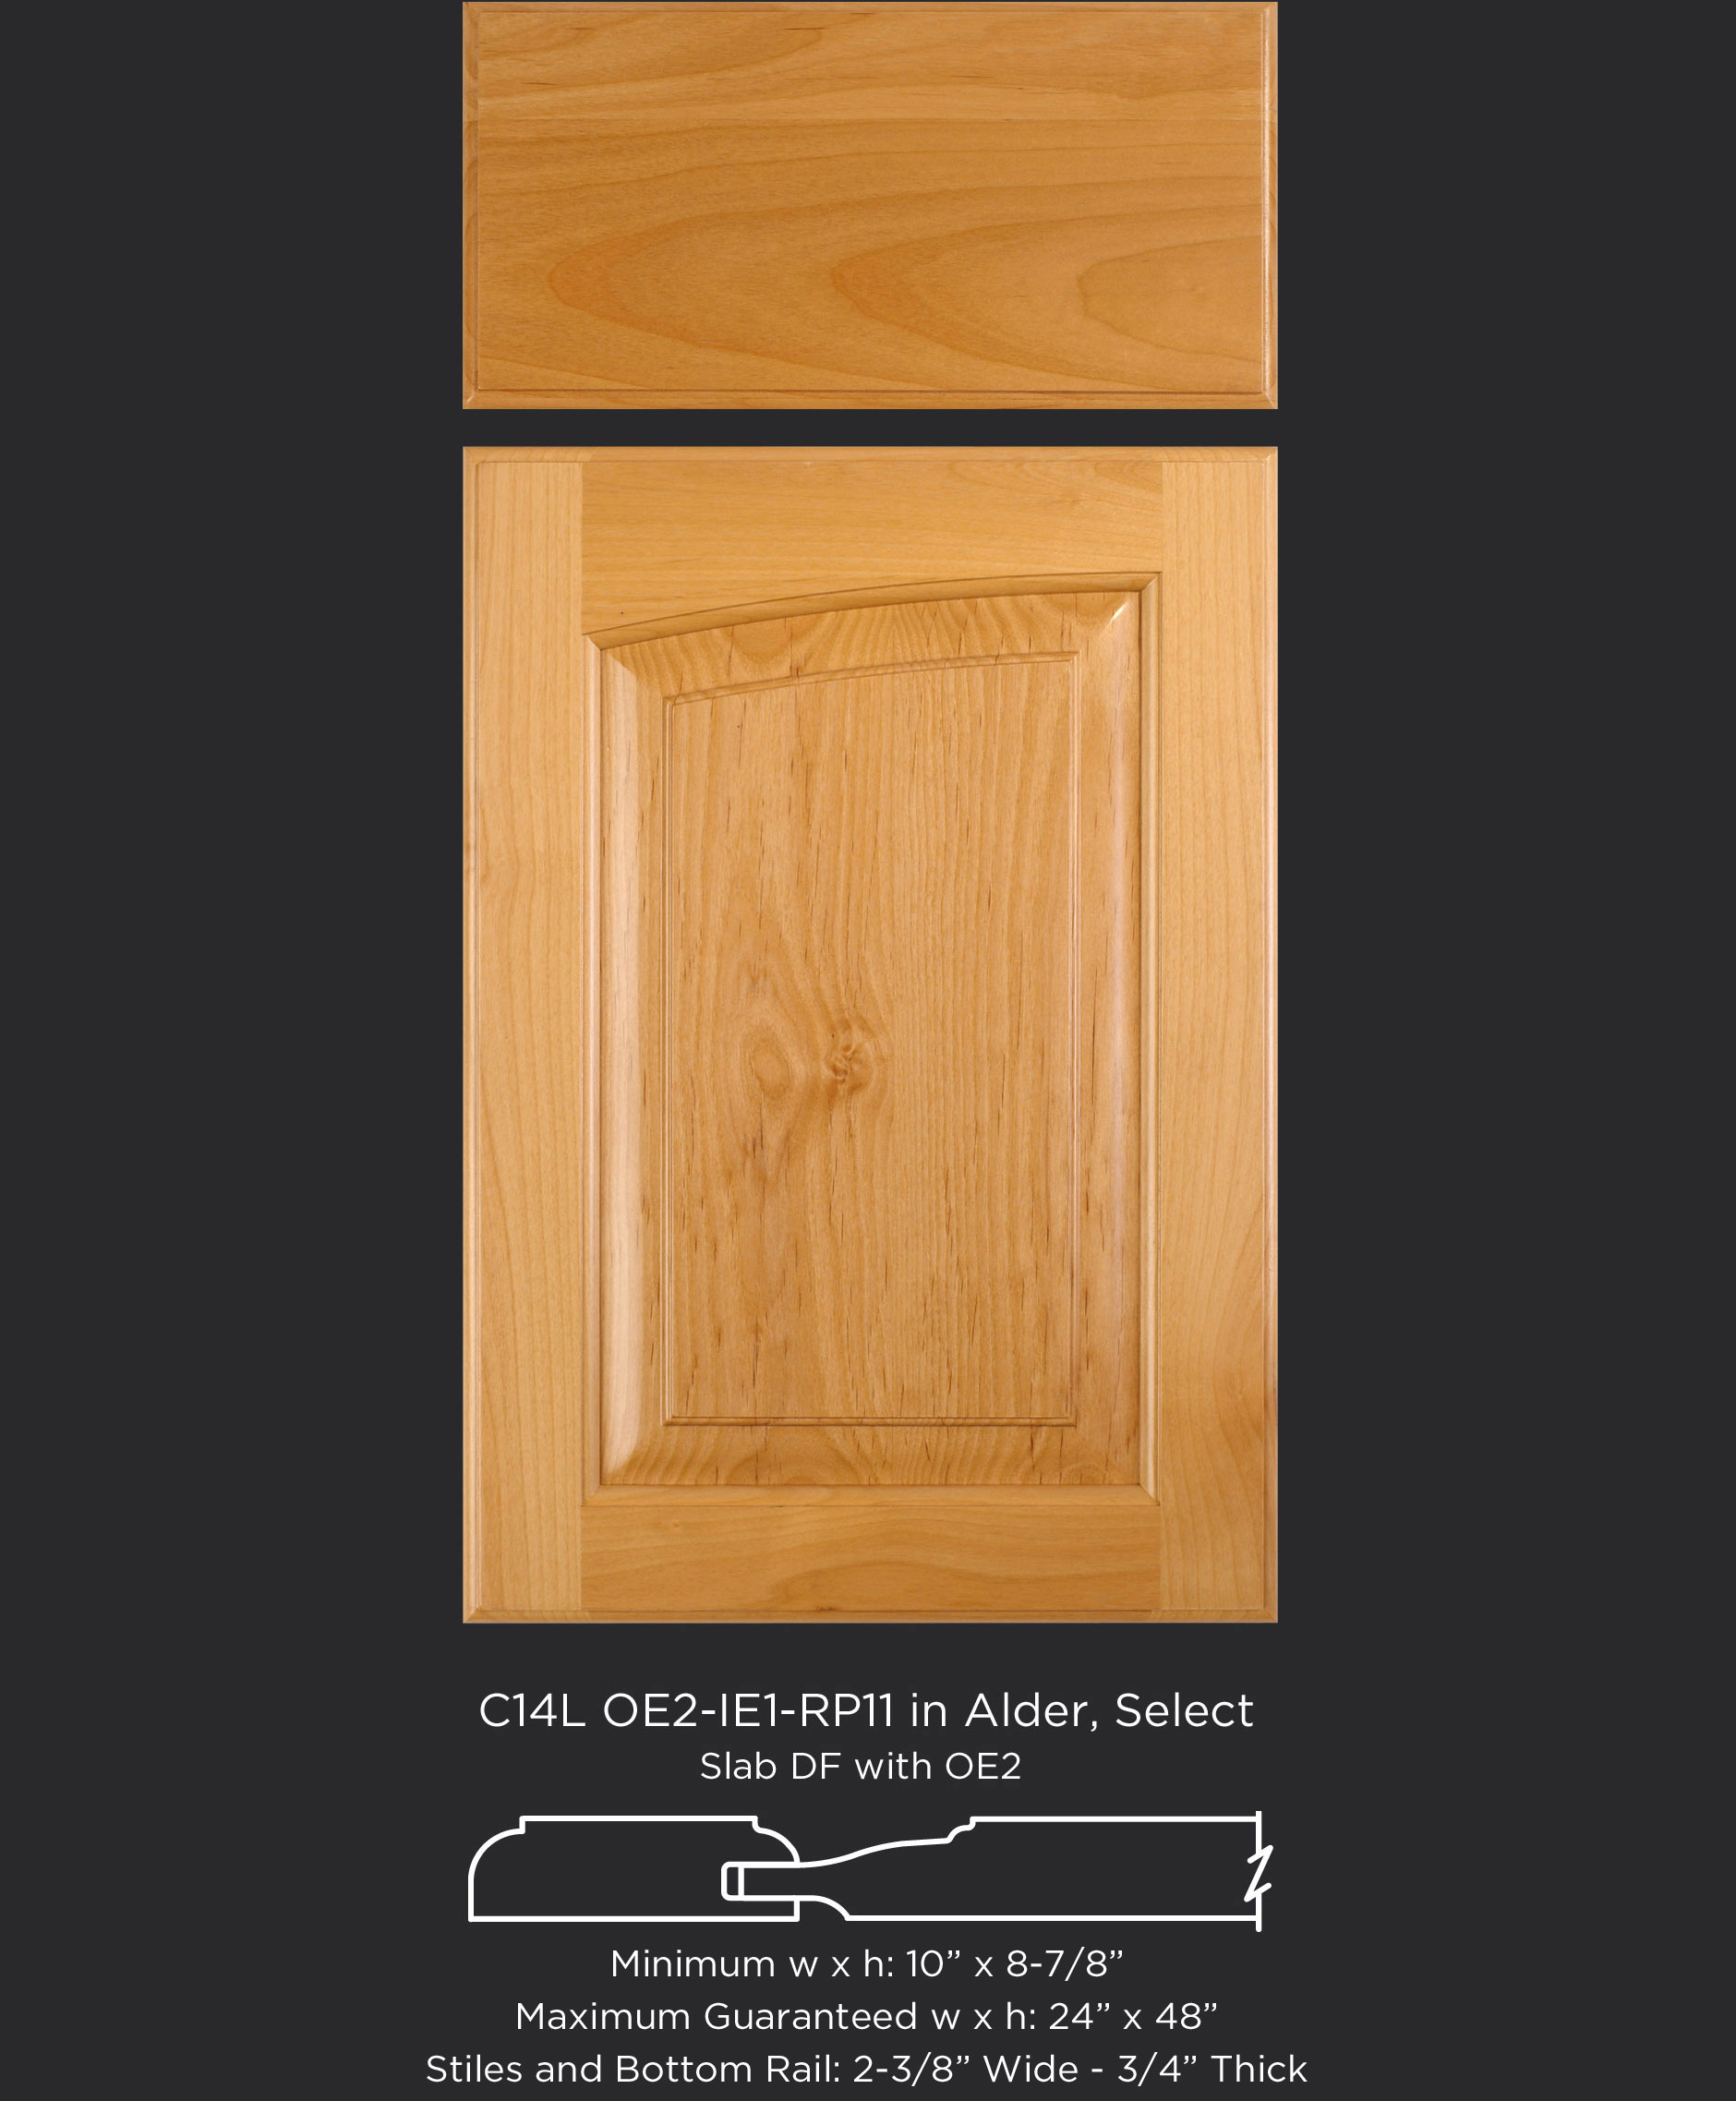 Cope and Stick Cabinet Door C14L OE2-IE1-RP11 in Alder, Select with Slab Drawer Front